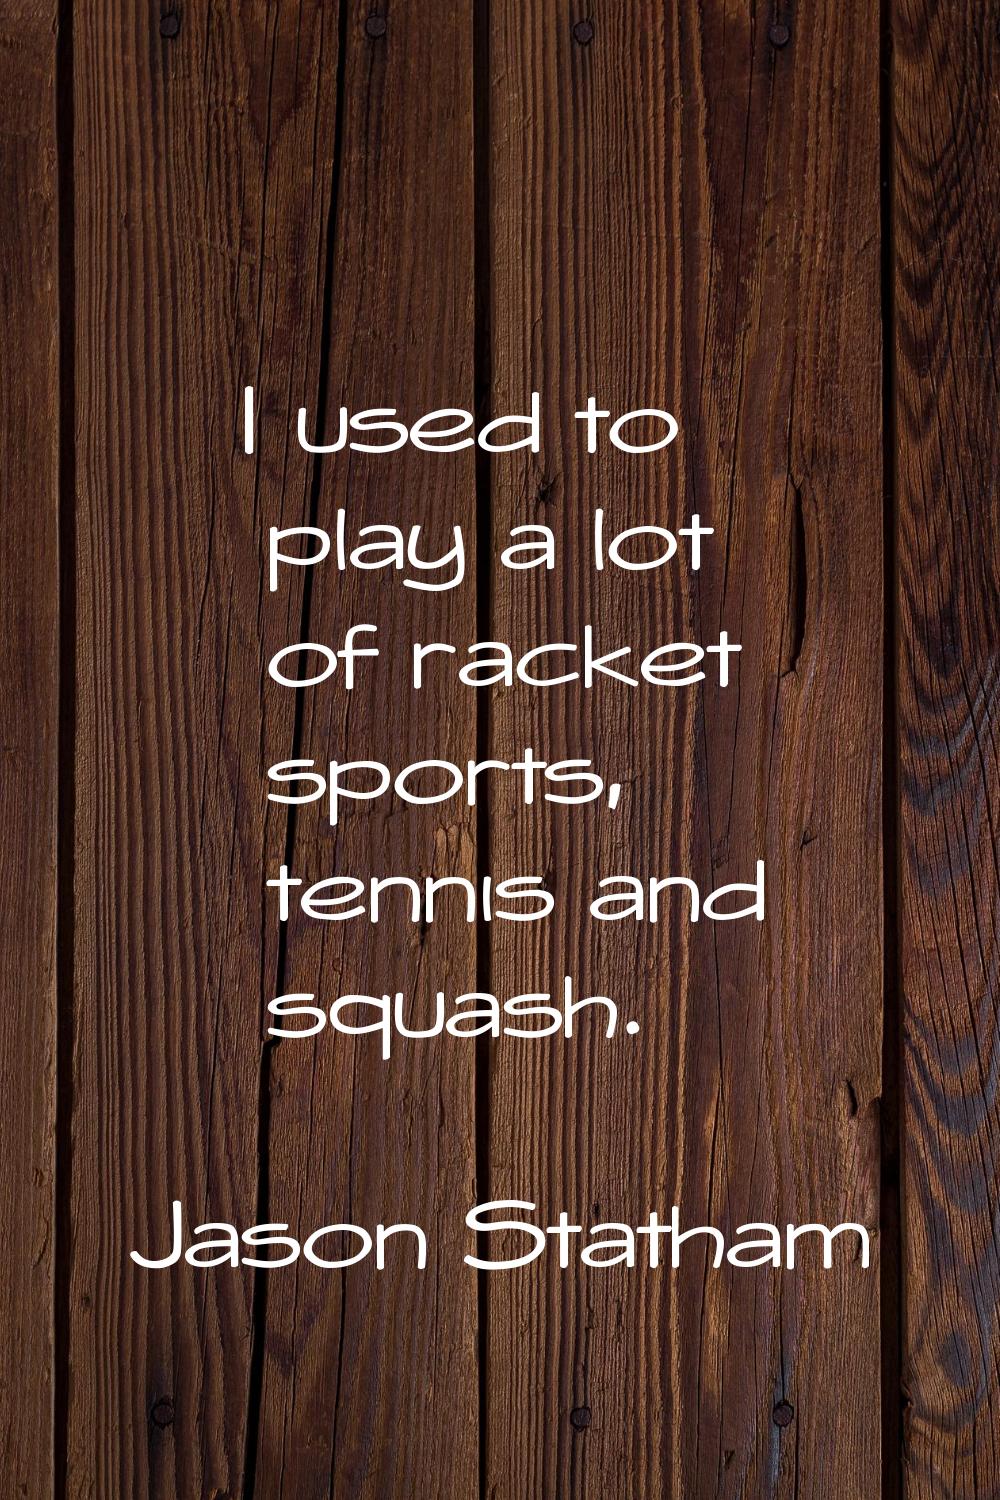 I used to play a lot of racket sports, tennis and squash.